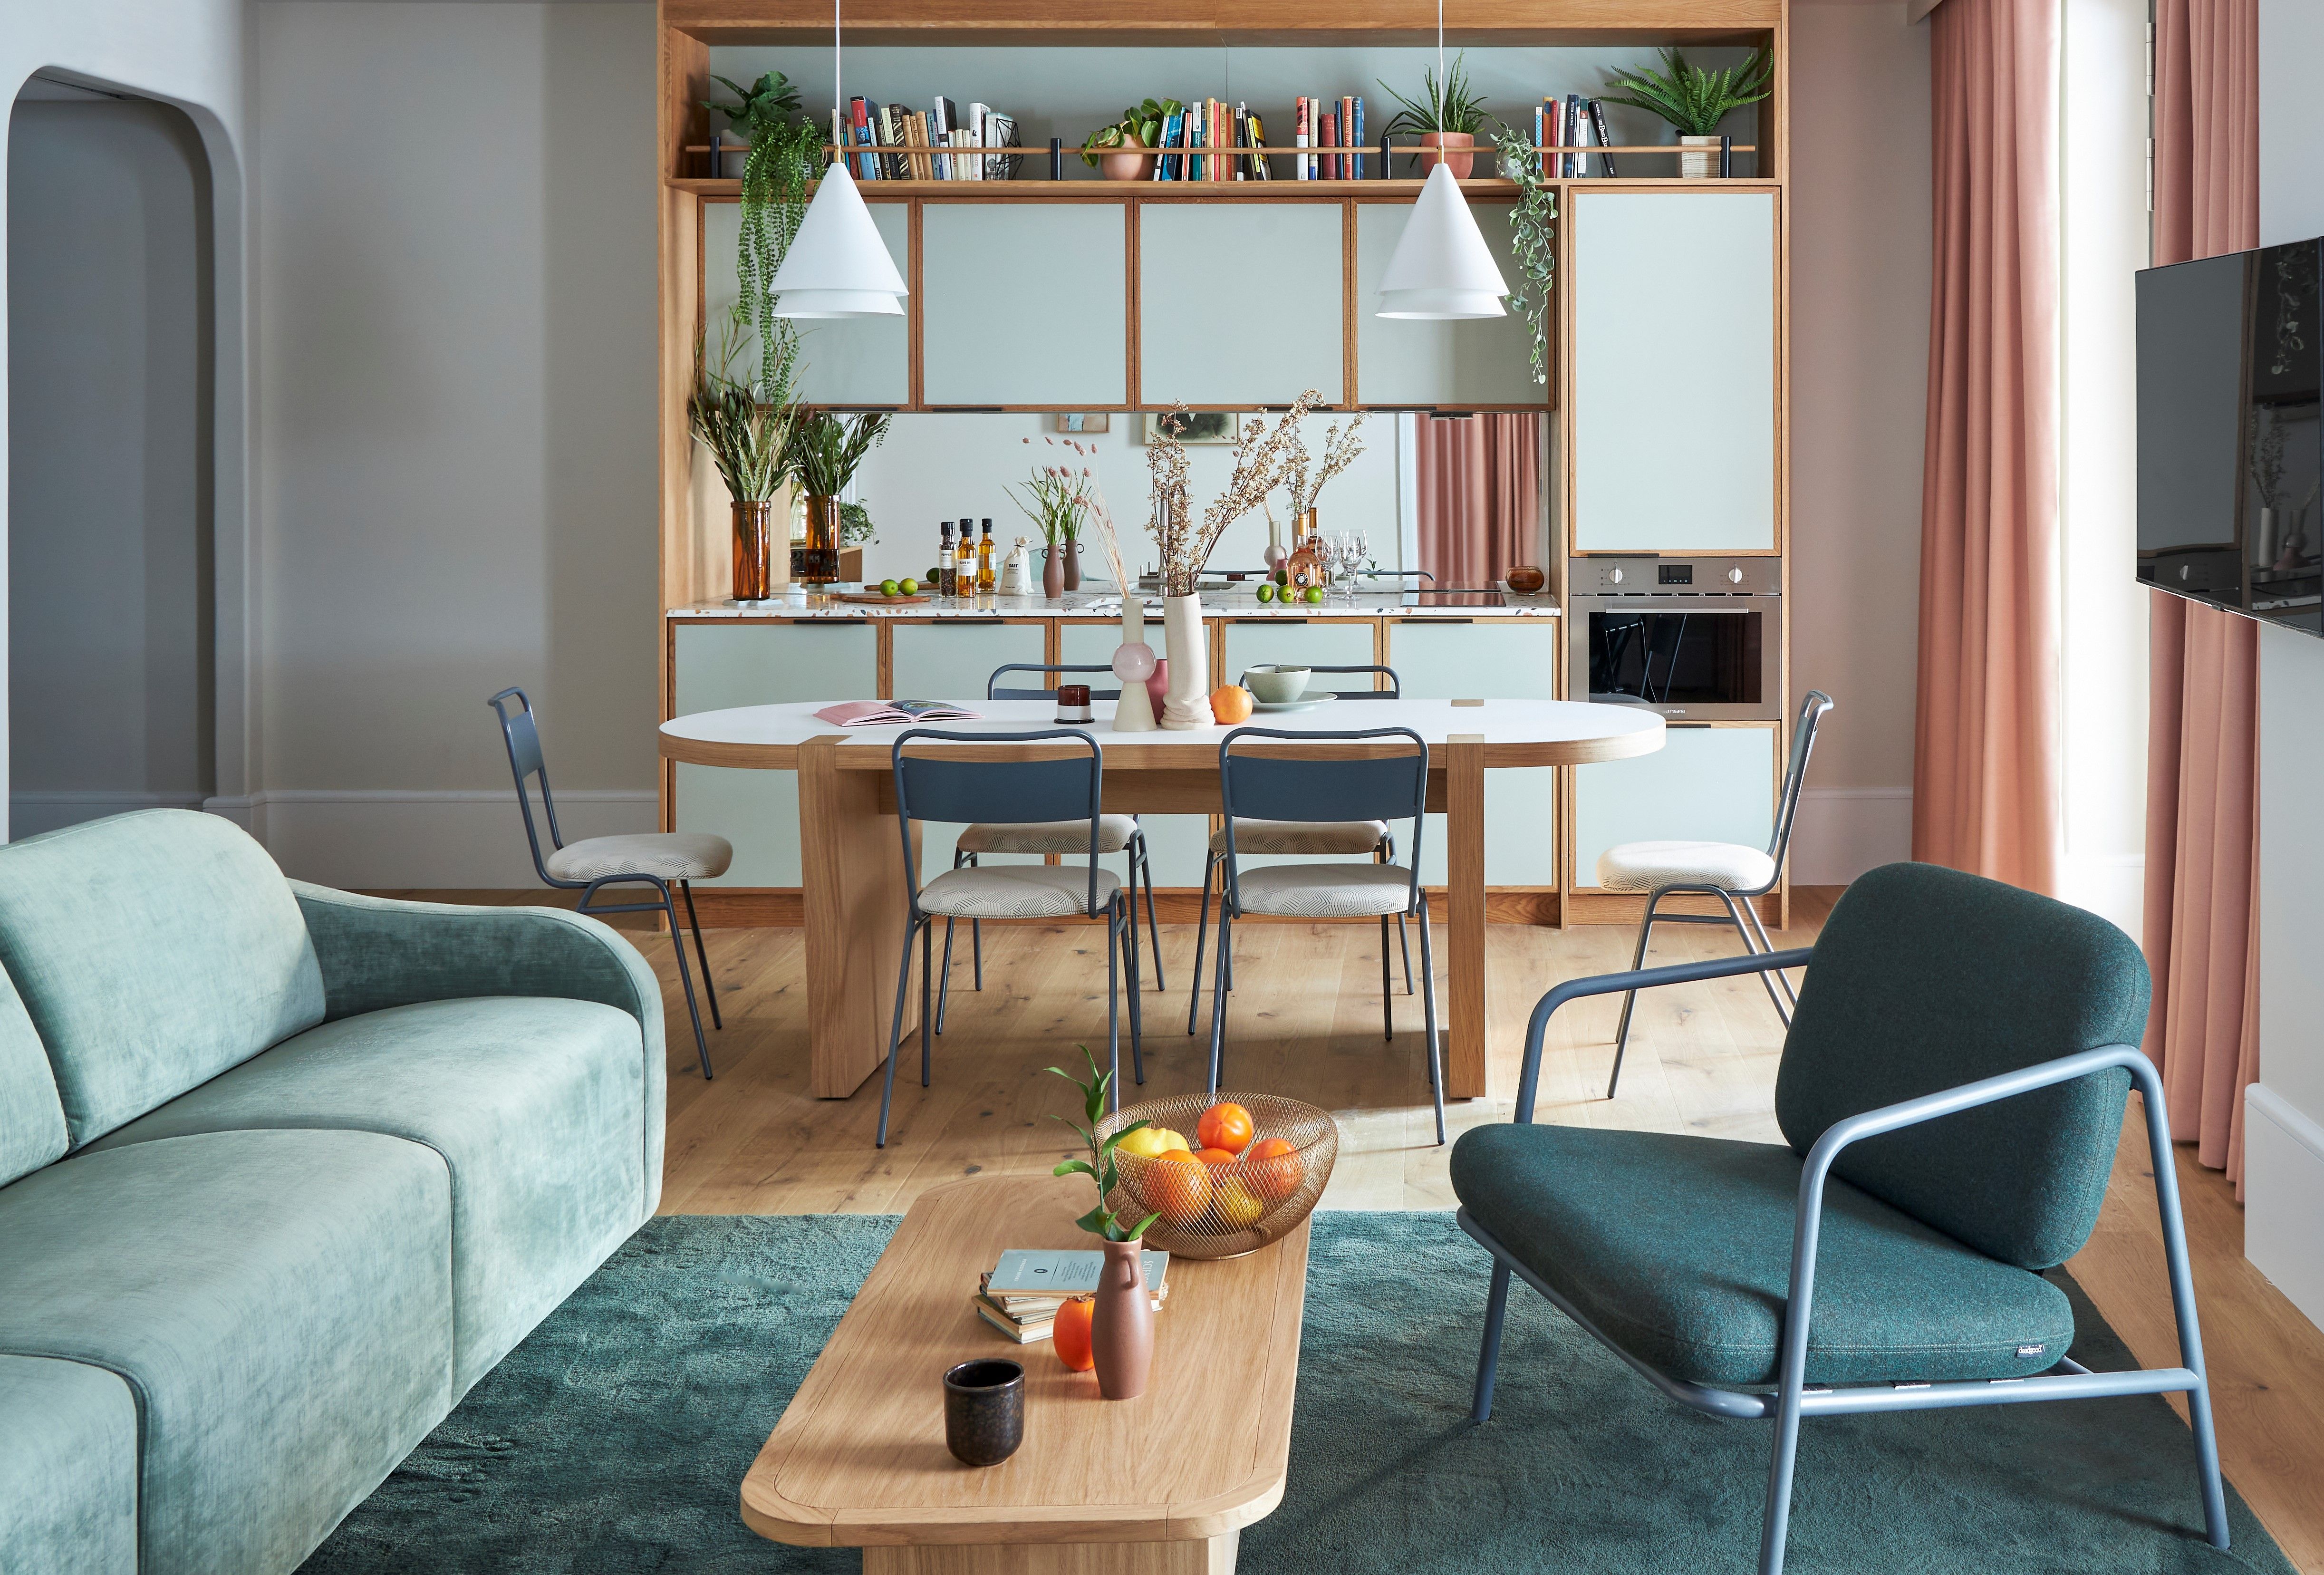 Pioneering lifestyle aparthotel brand, Locke, opens Turing Locke alongside the UK’s first Hyatt Centric hotel and new food and drink destinations KOTA and Dutch.